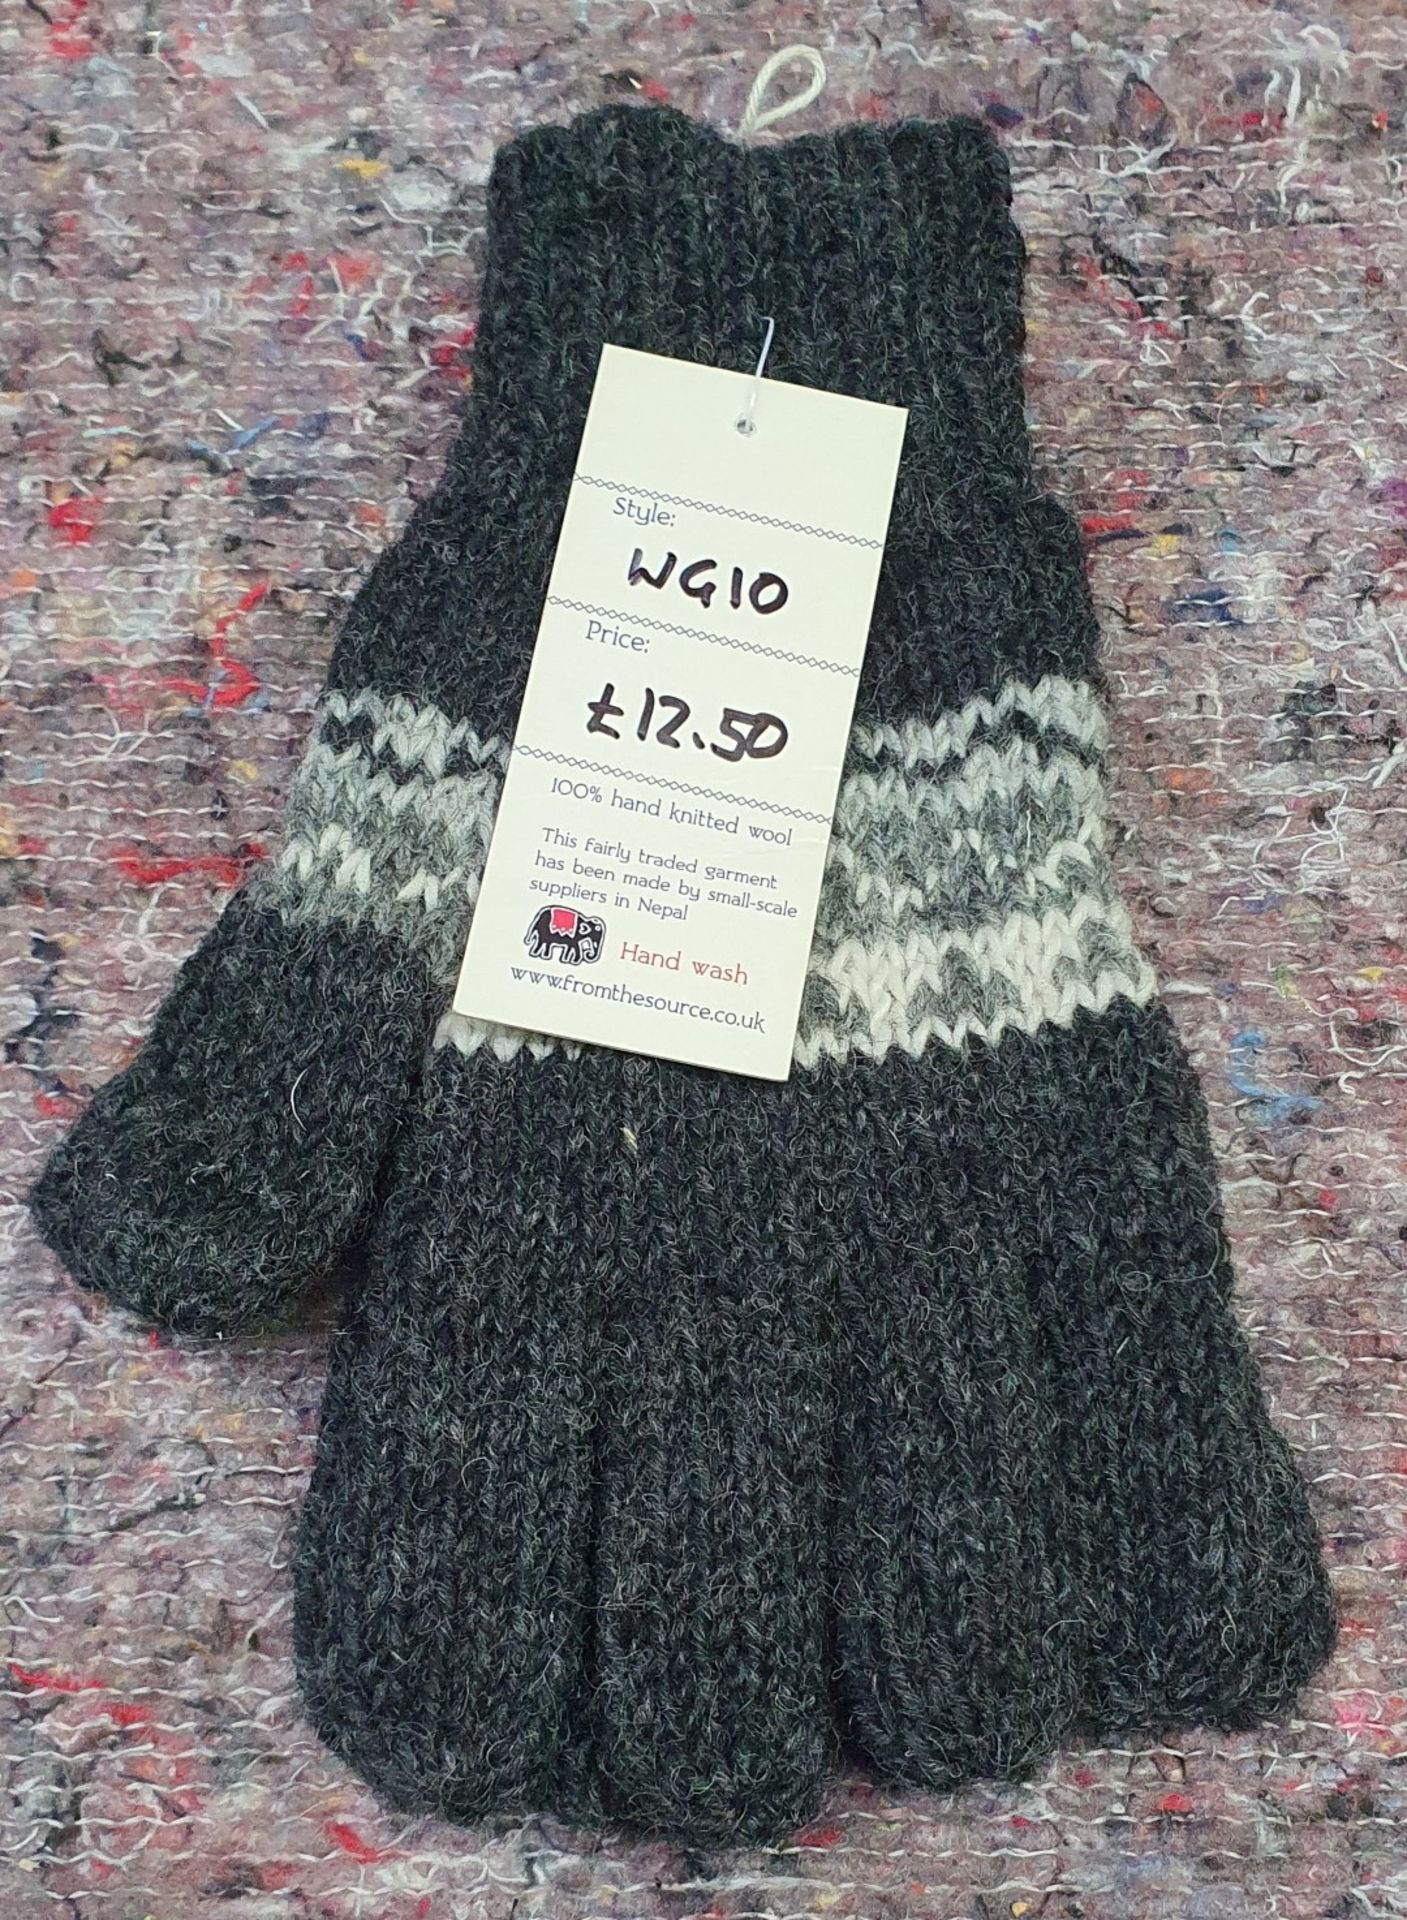 13 x Assorted Bobble Hats and Woolly Gloves by From The Source - New Stock - Ref: TCH236 - CL840 - - Image 22 of 24